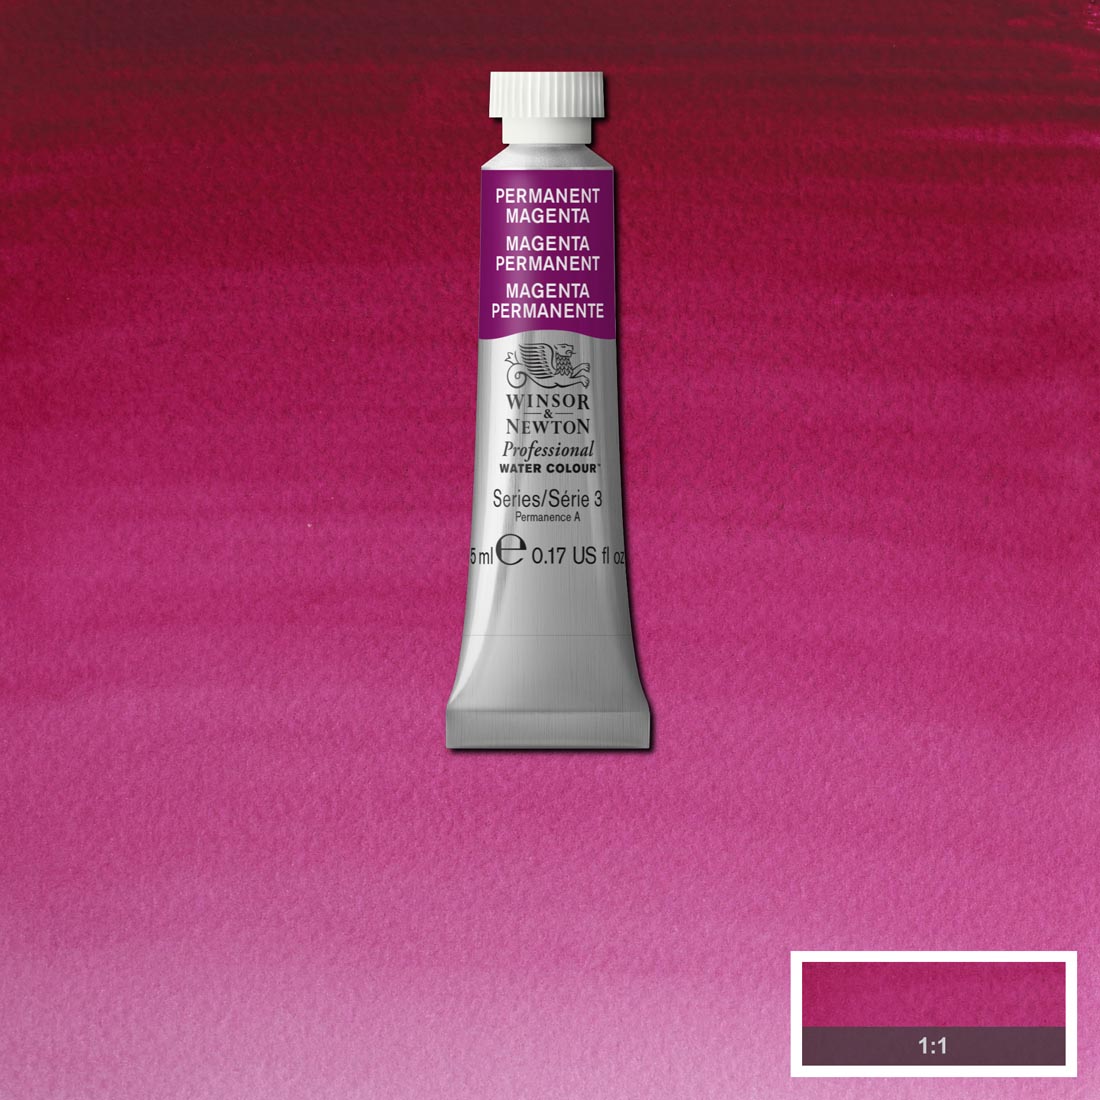 Tube of Permanent Magenta Winsor & Newton Professional Water Colour with a paint swatch for the background